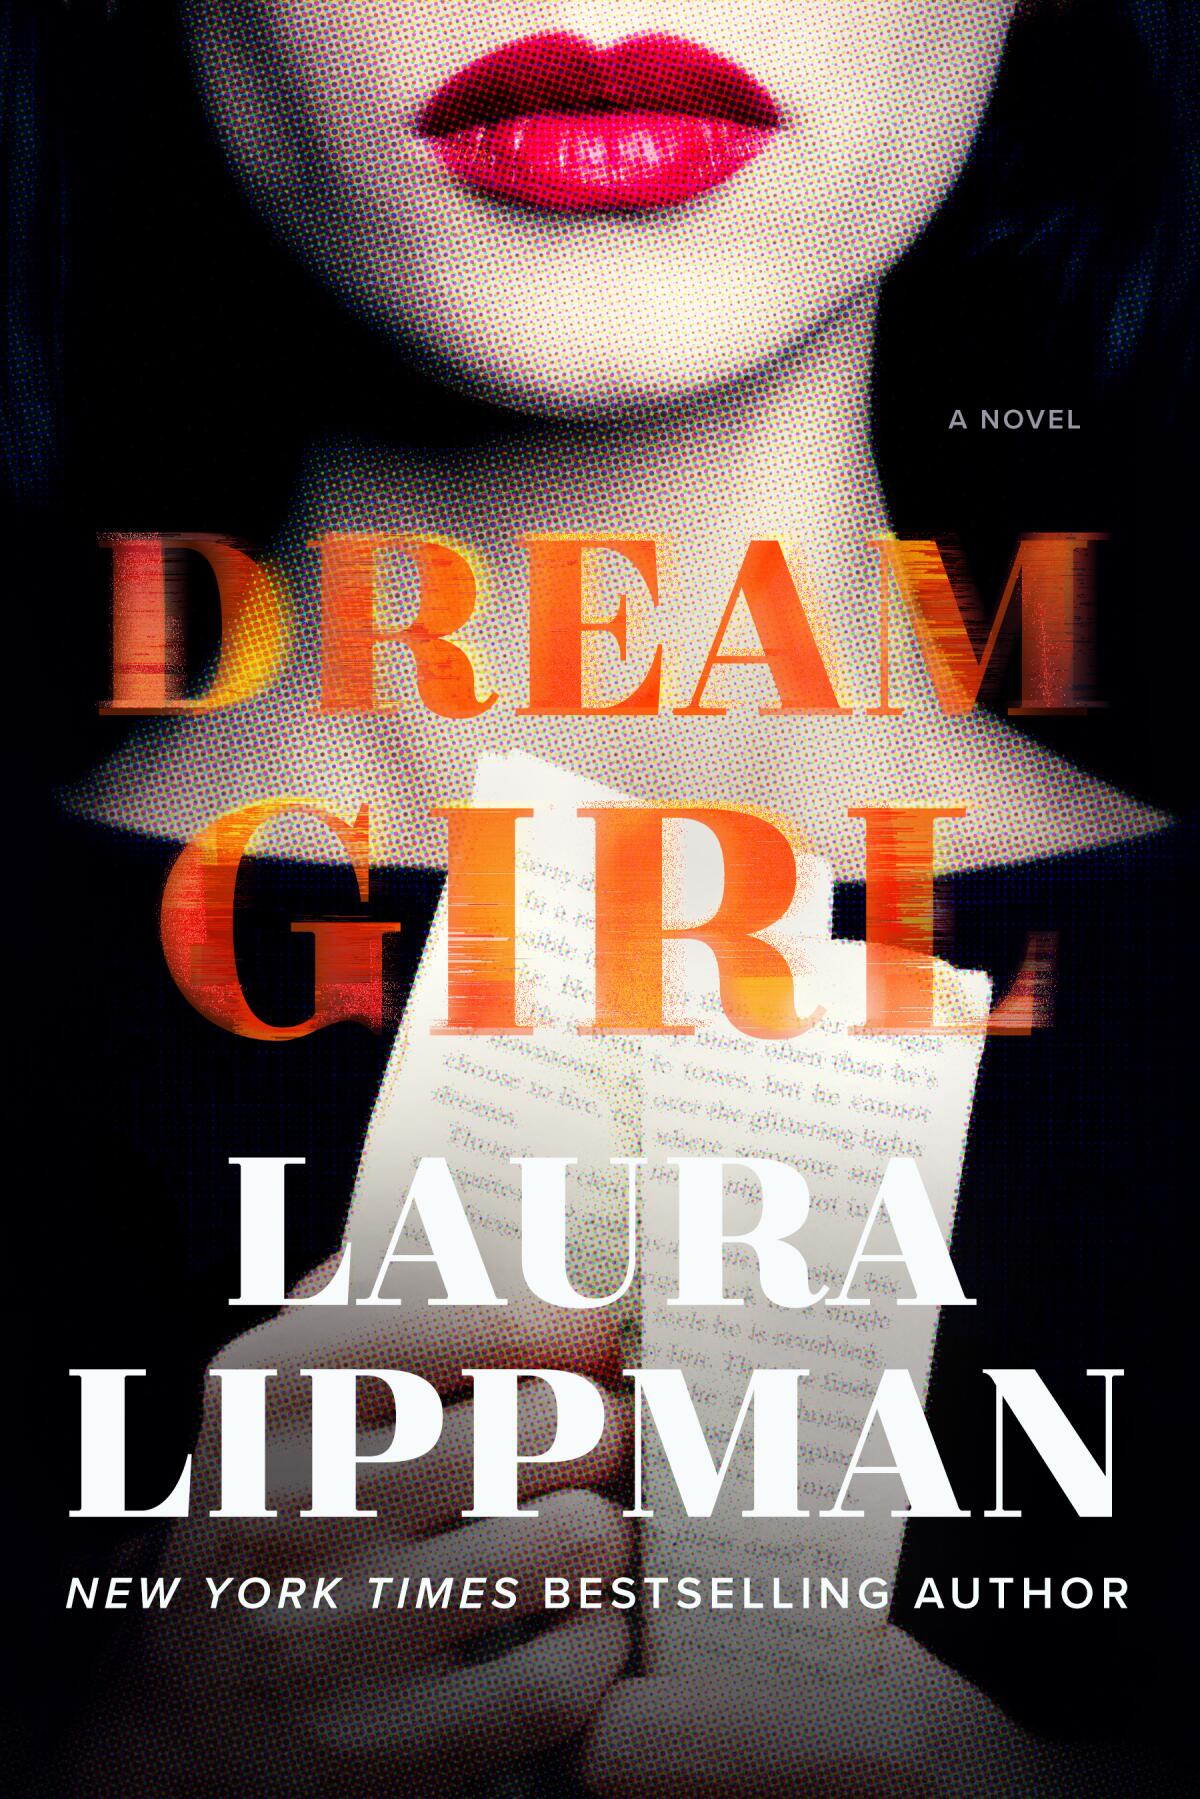 The cover of the book "Dream Girl," by Laura Lippman